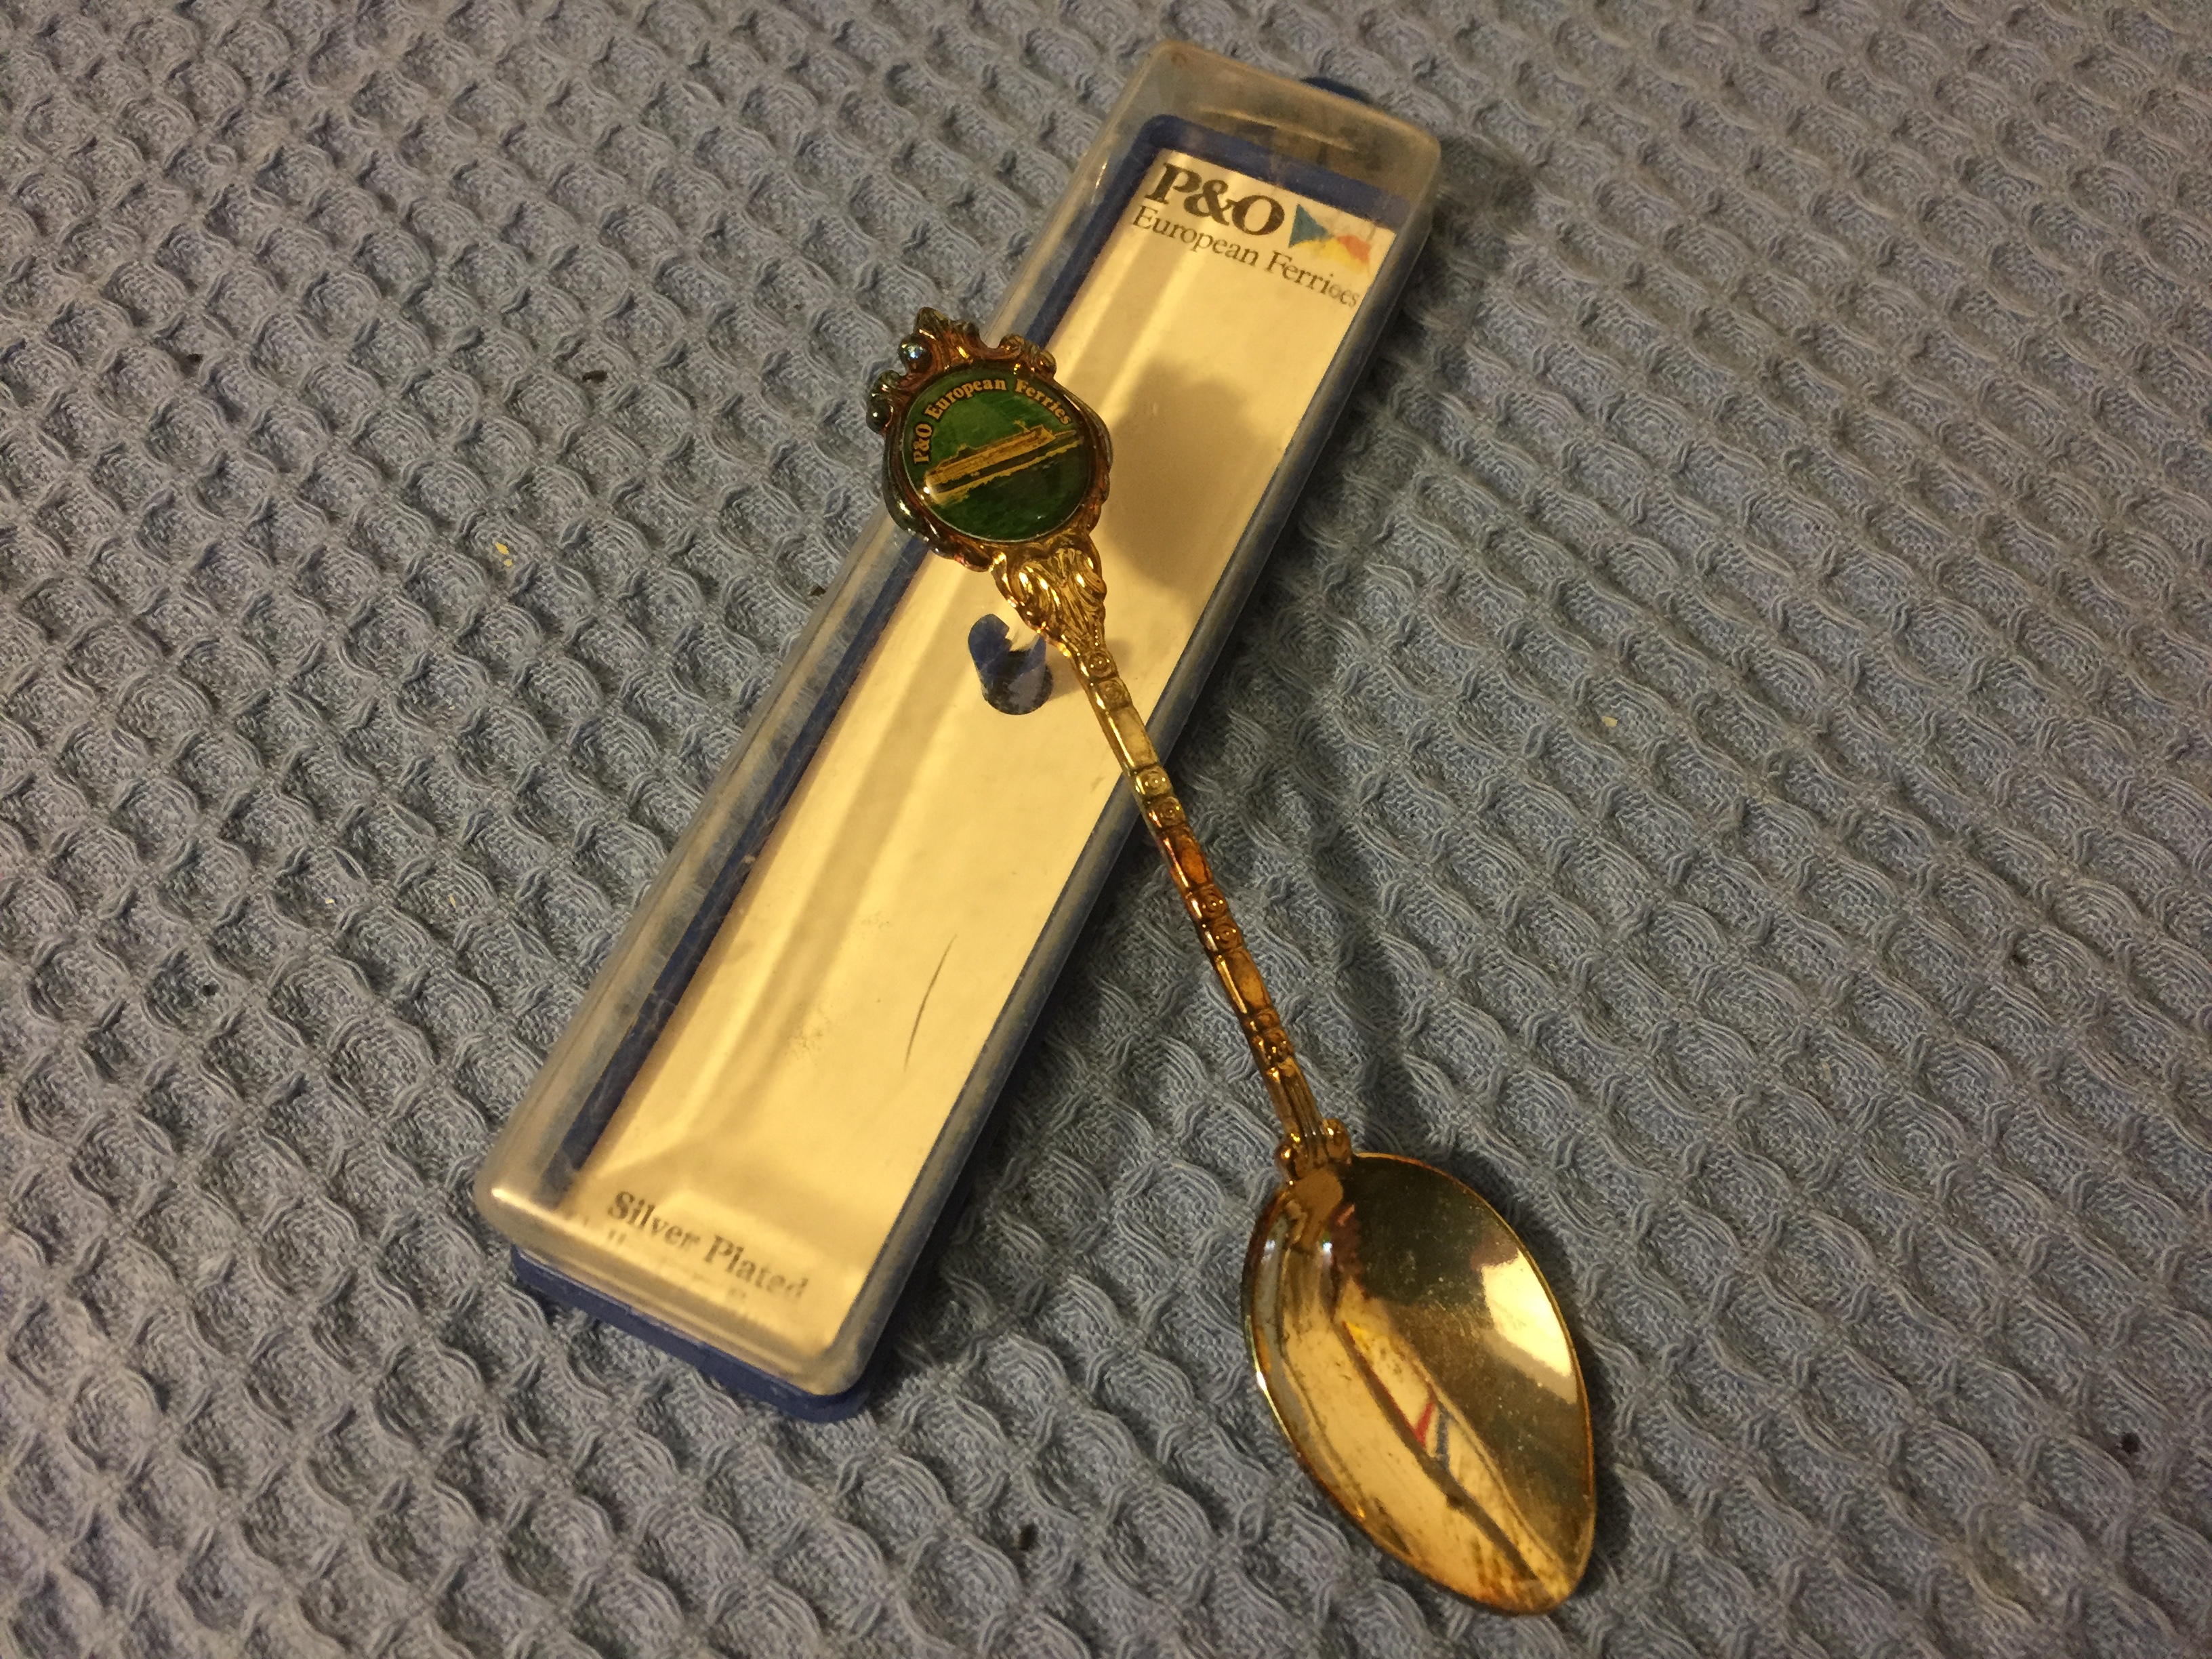 BOXED SOUVENIR SPOON FROM THE P&O EUROPEAN FERRIES COMPANY        